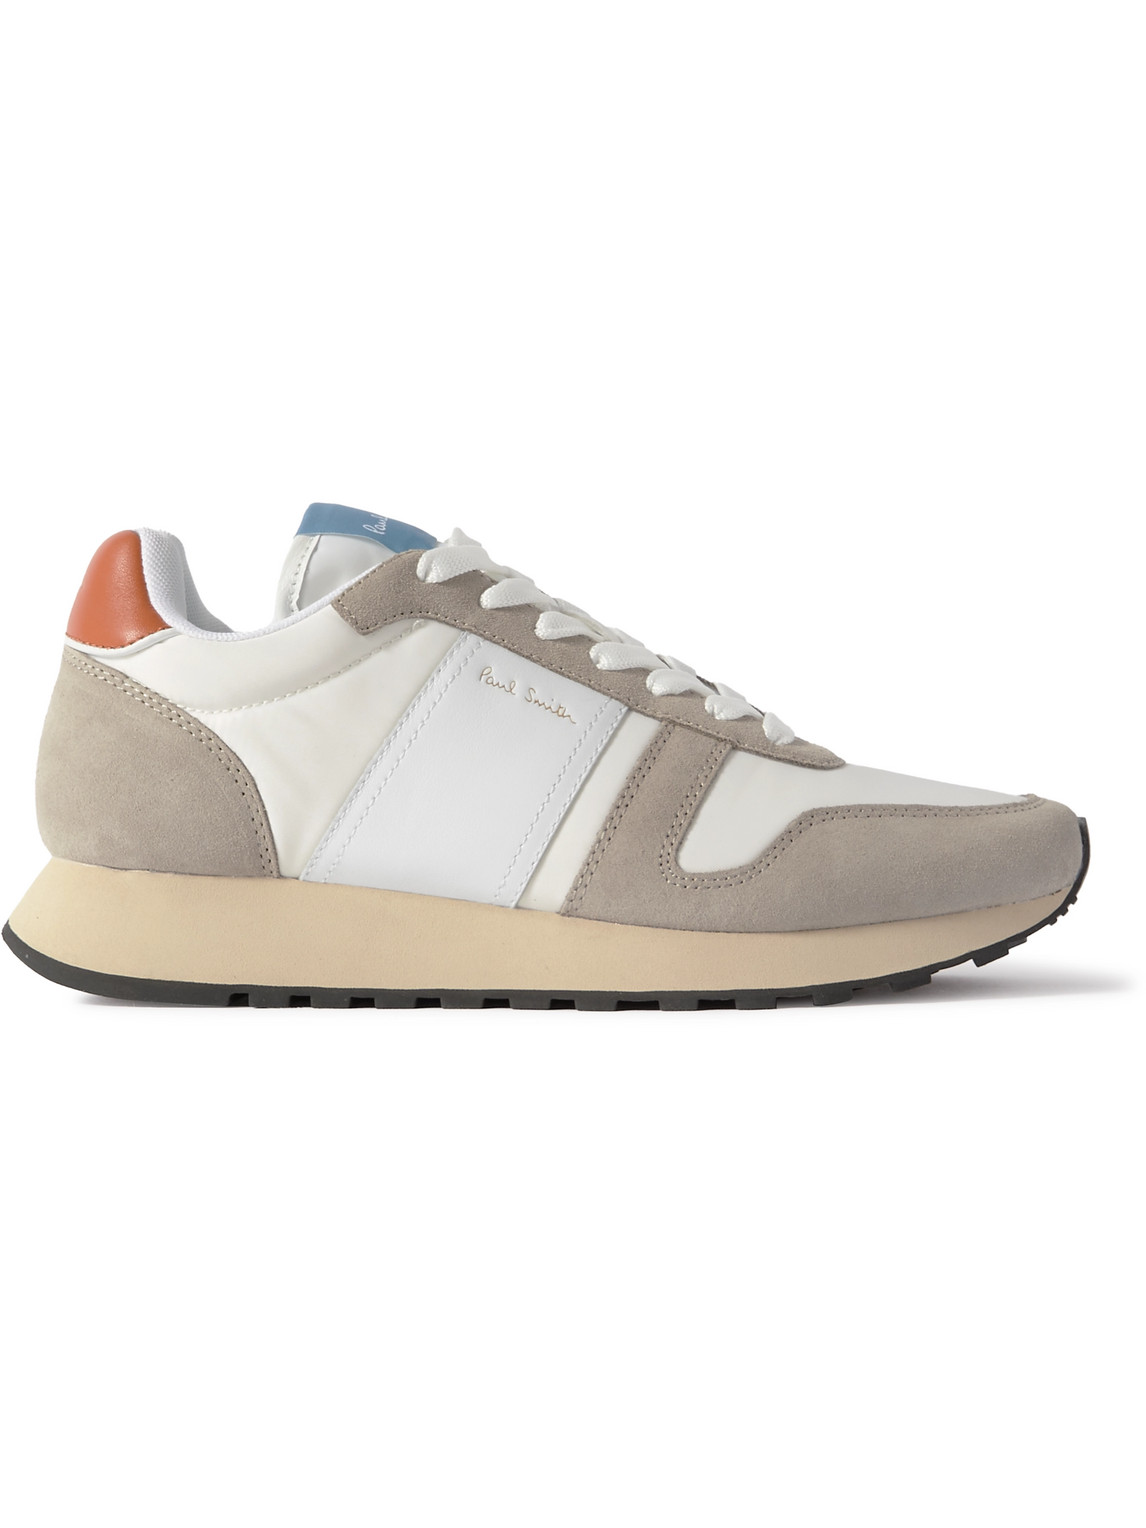 Paul Smith Eighties Leather And Suede Trainers In Neutrals